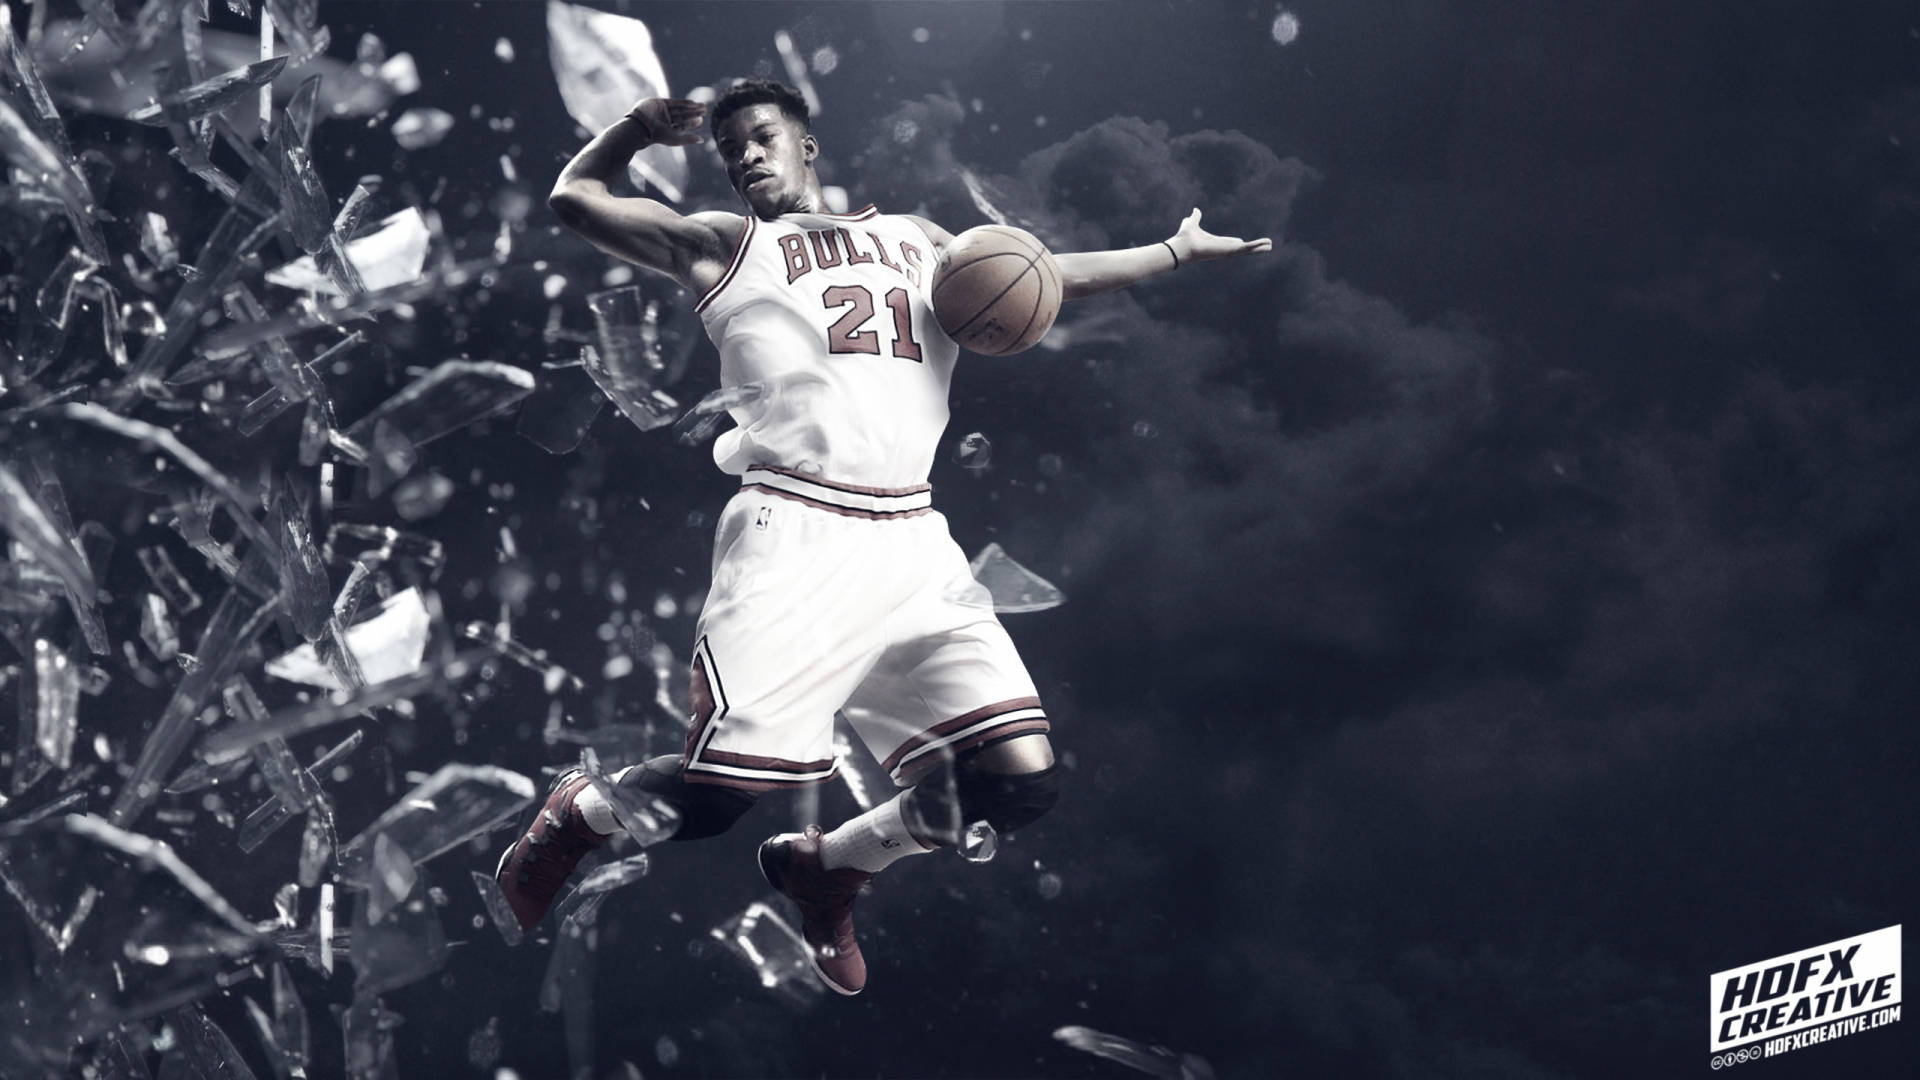 Top 999+ Jimmy Butler Wallpaper Full HD, 4K✅Free to Use